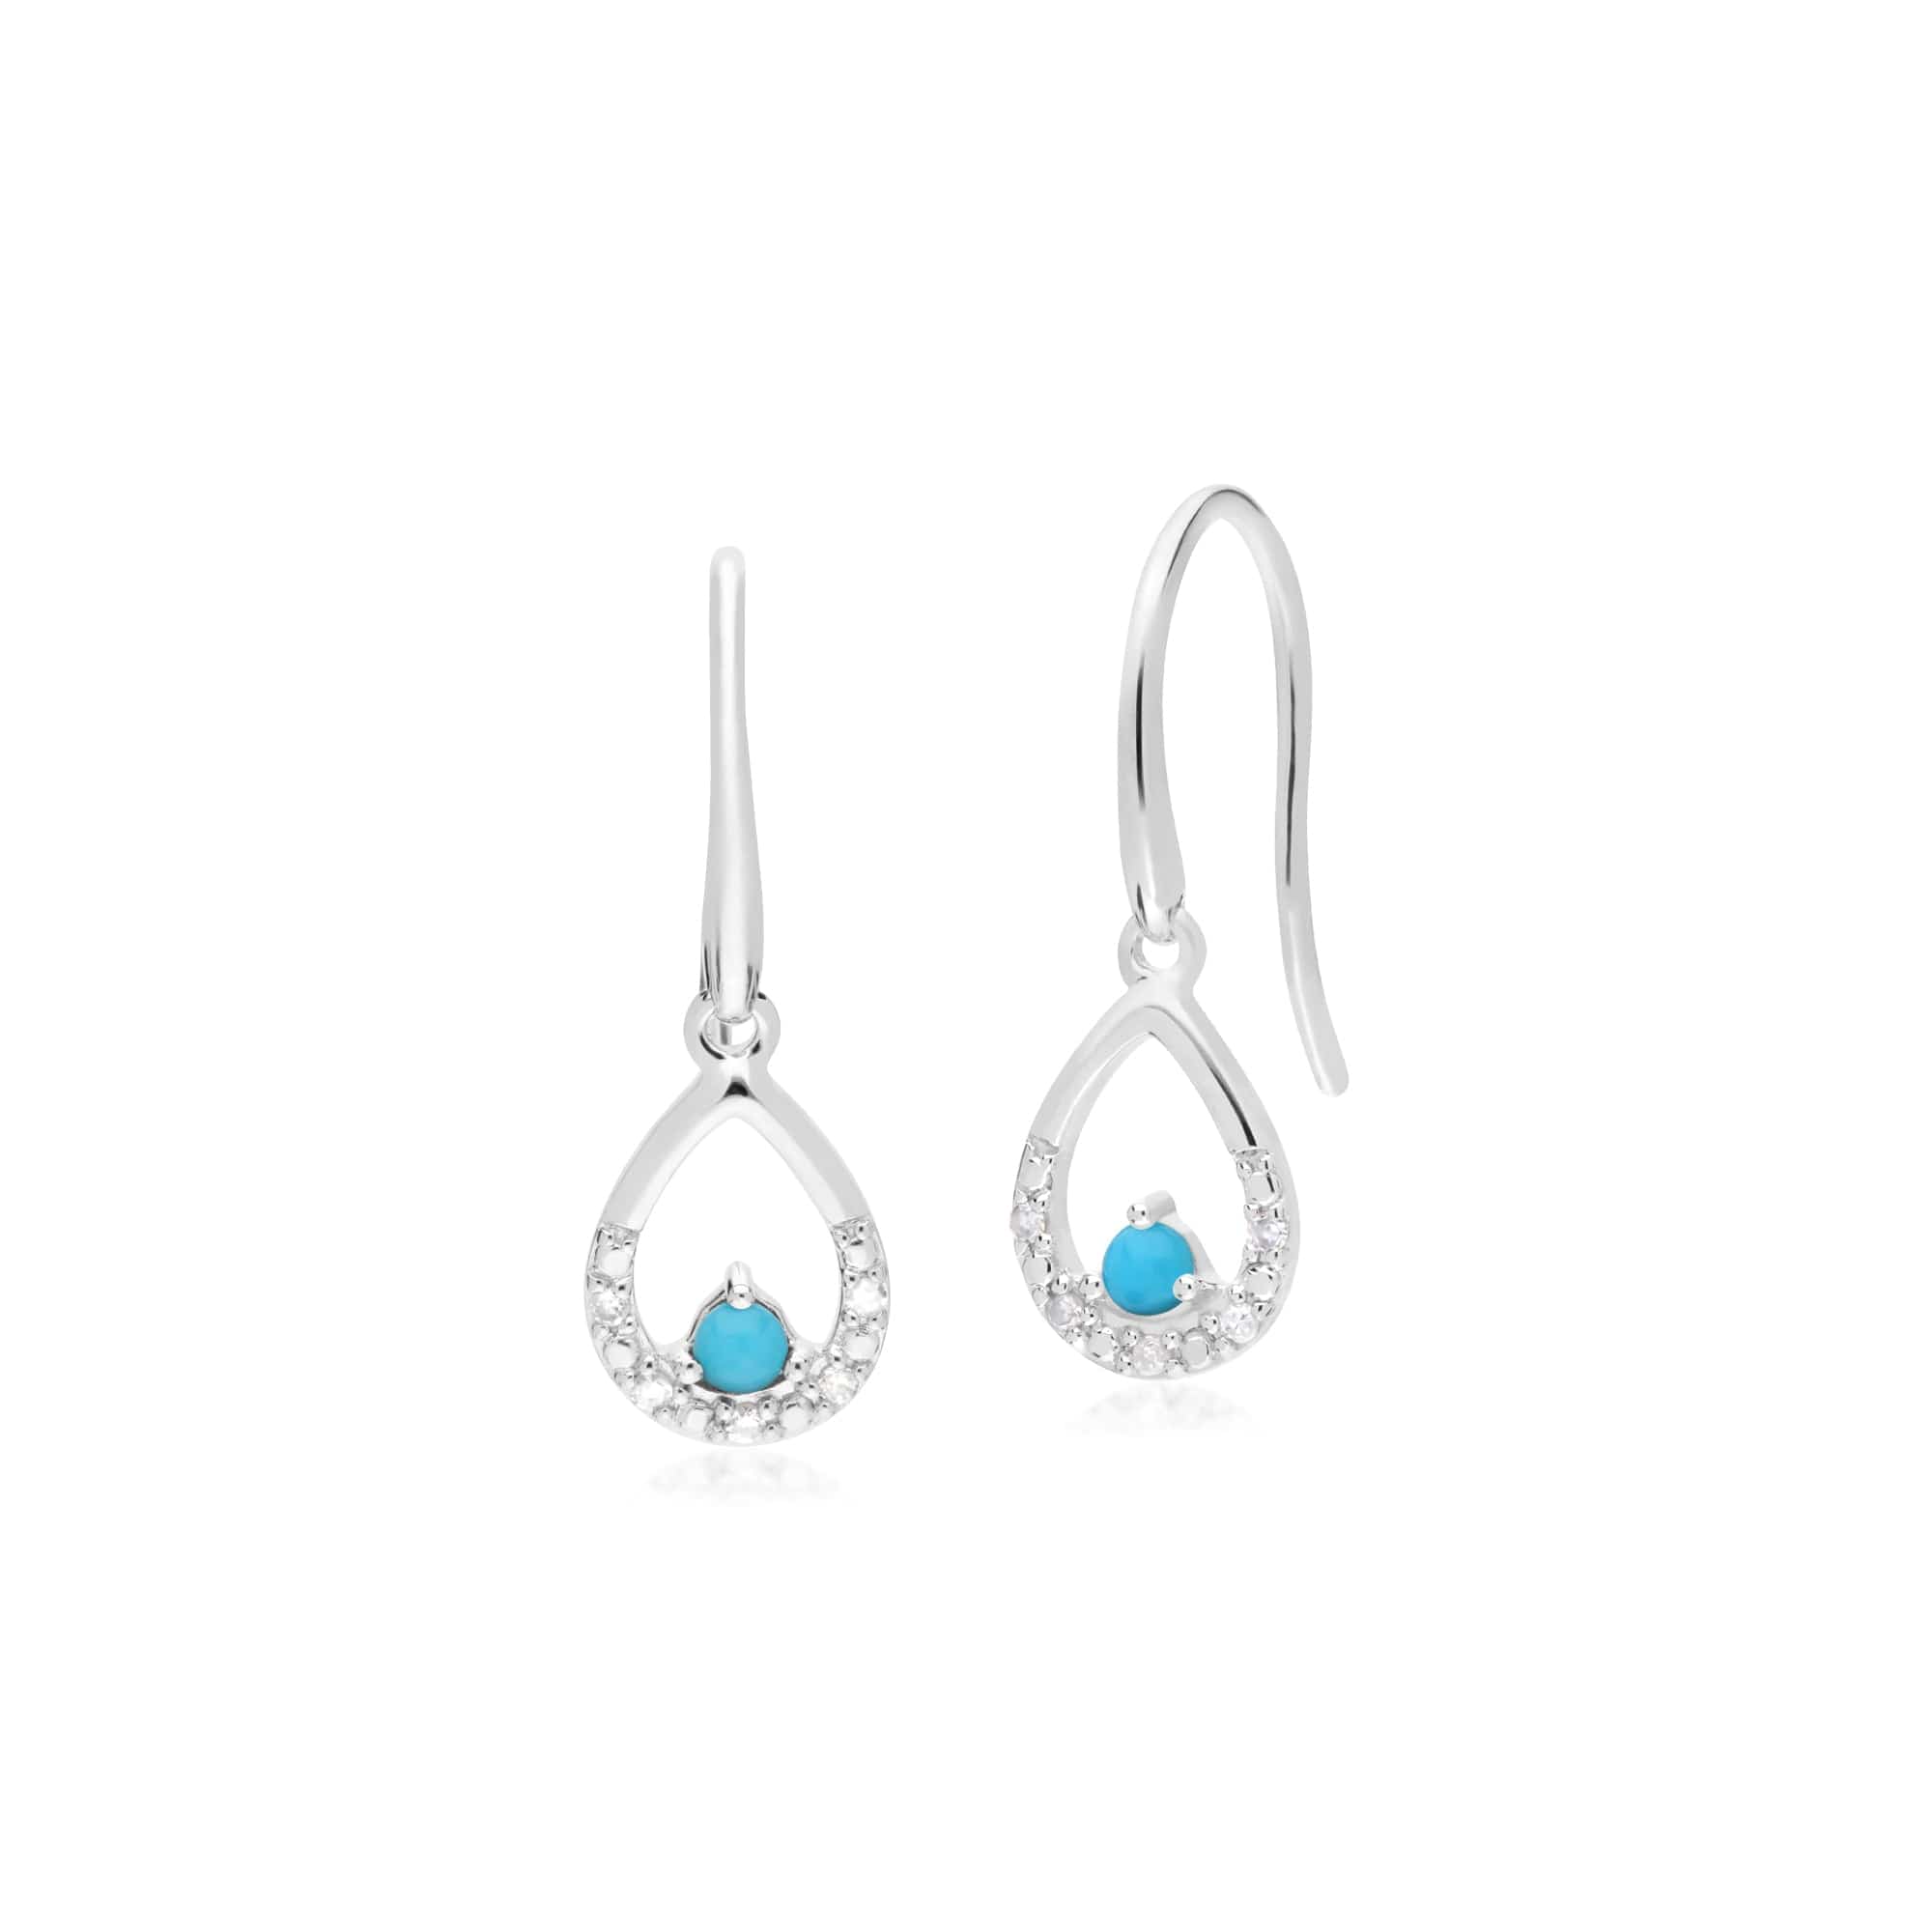 162E0261019-162P0222019 Classic Round Turquoise & Diamond Pear Drop Earrings & Pendant Set in 9ct White Gold 2